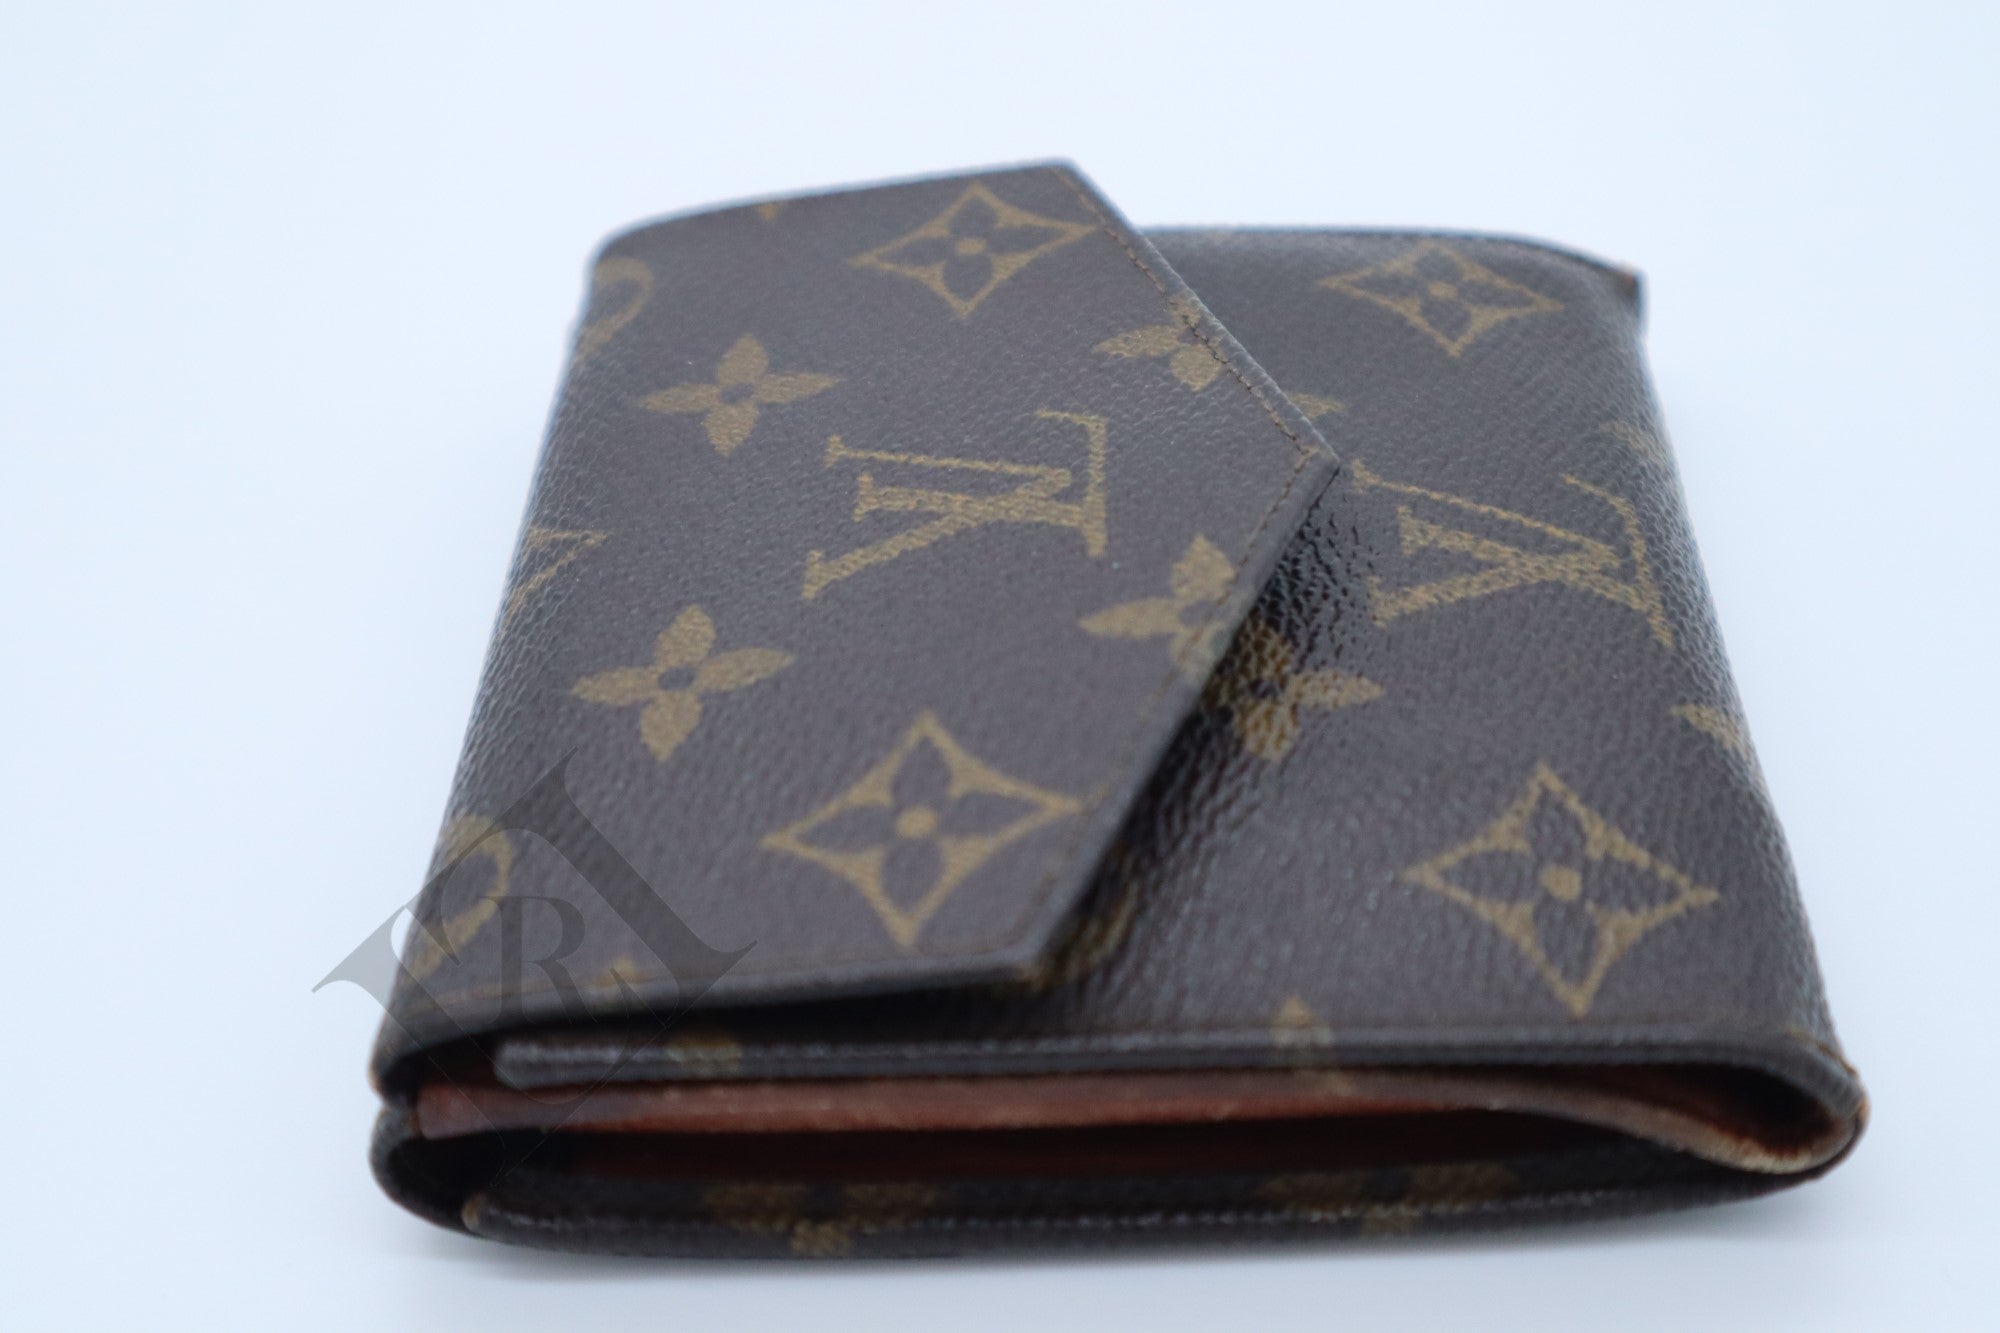 Louis Vuitton Elise Double Sided Compact French Wallet LV-1203P-0008